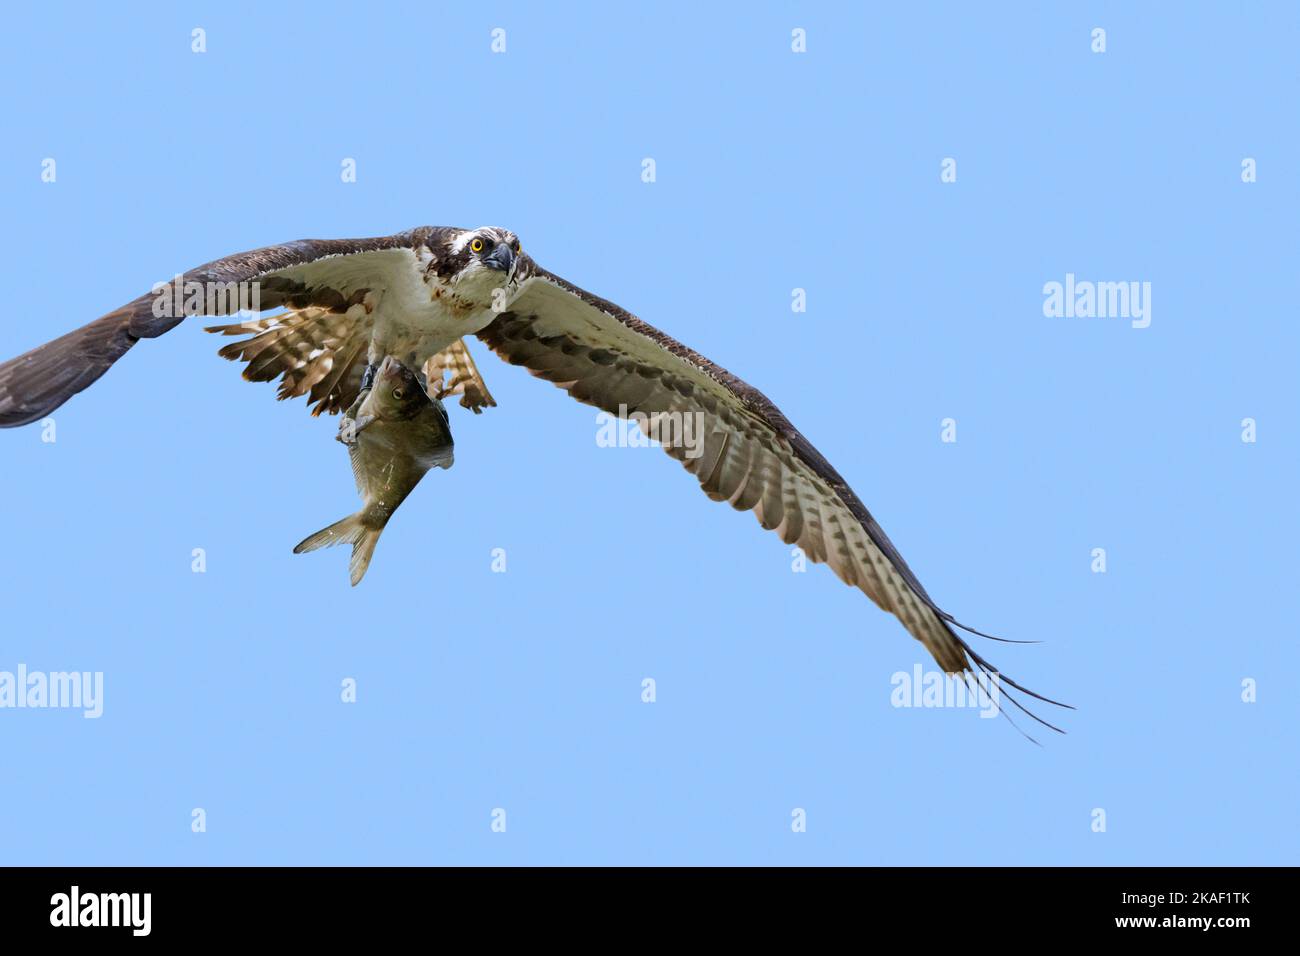 Western osprey (Pandion haliaetus) flying over lake with caught fish in its talons / claws against blue sky Stock Photo